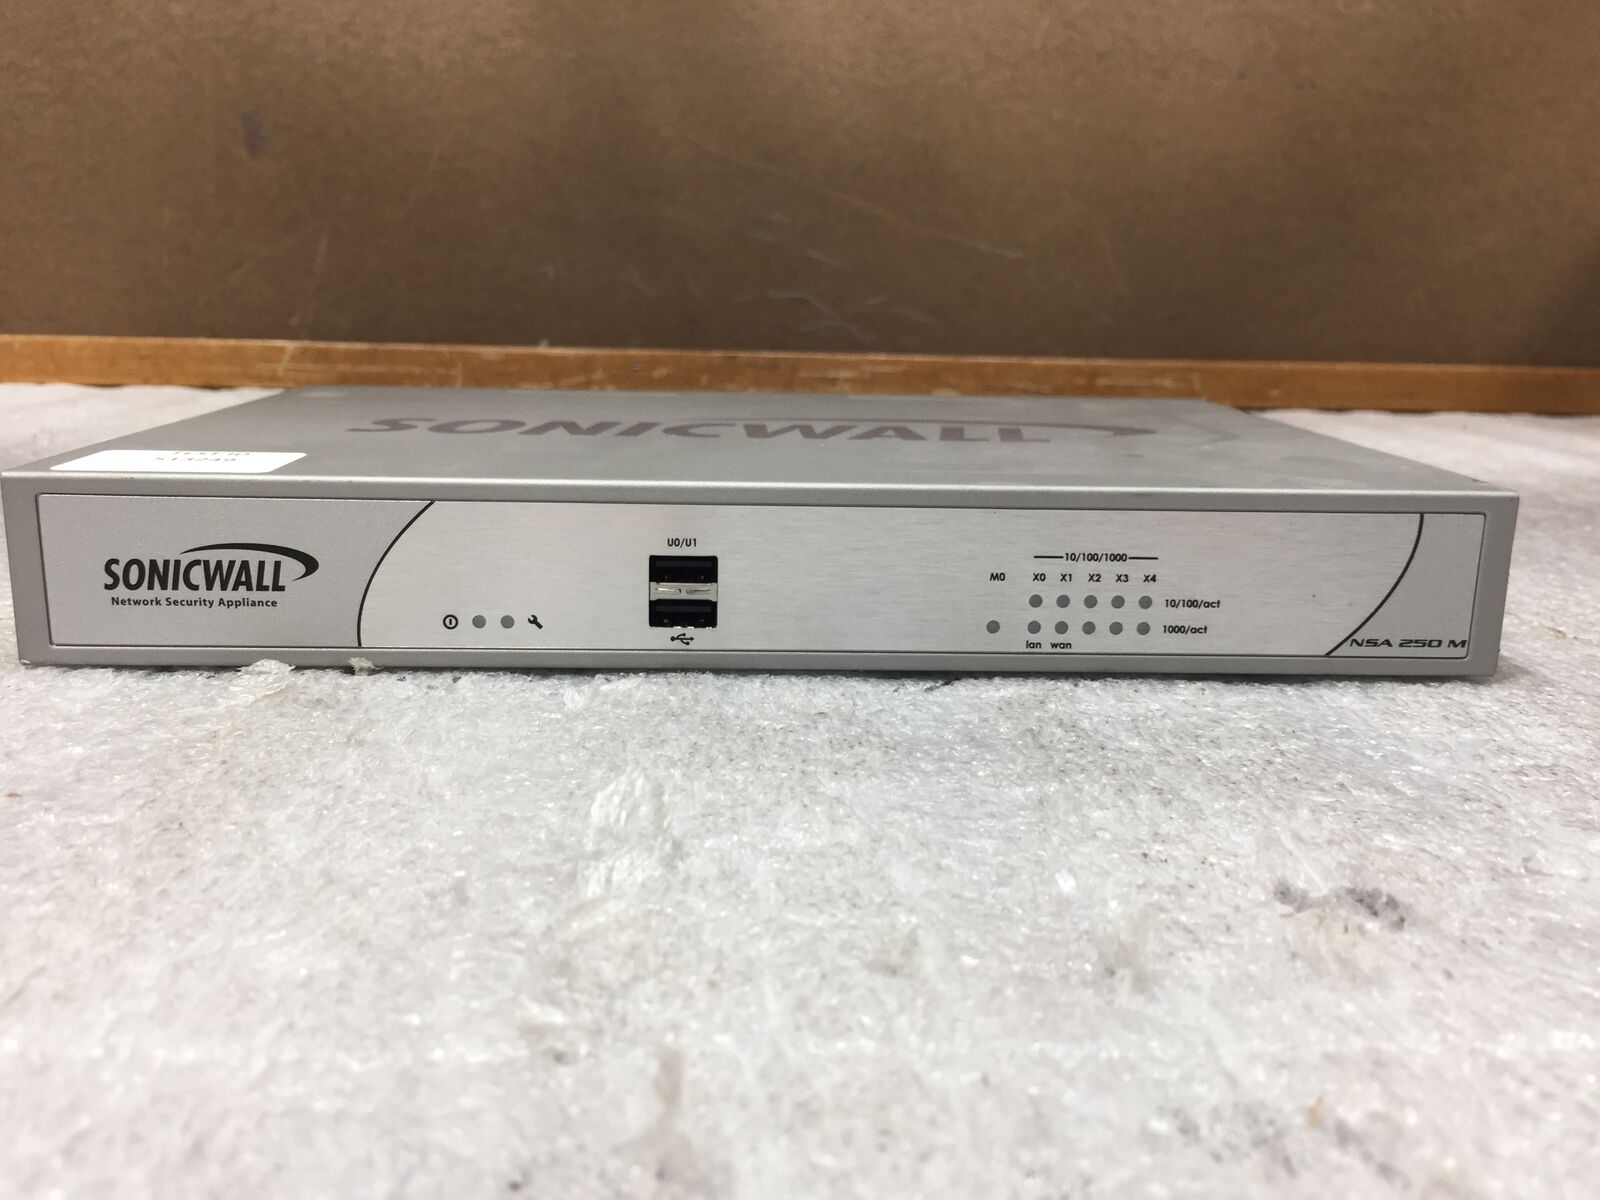 SonicWALL NSA 250M Network Security Appliance, Good Condition Tested and Working